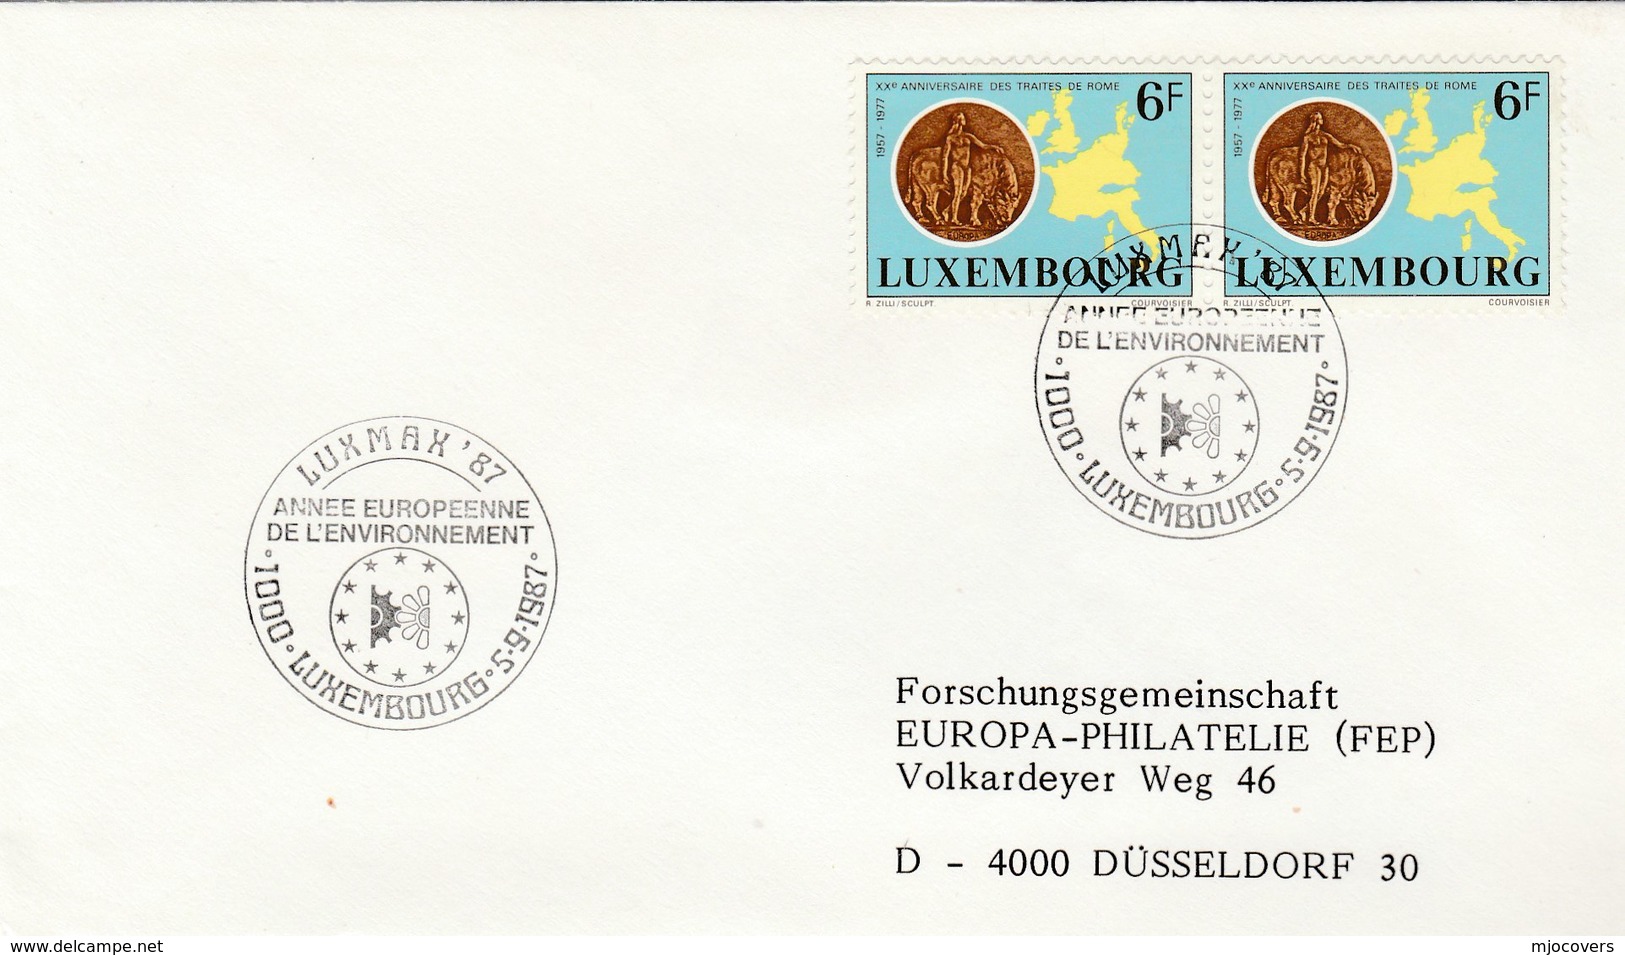 1987 LUXEMBOURG European ENVIRONMENT YEAR EVENT COVER Franked 2x TREATY OF ROME Stamps European Community Map - Covers & Documents